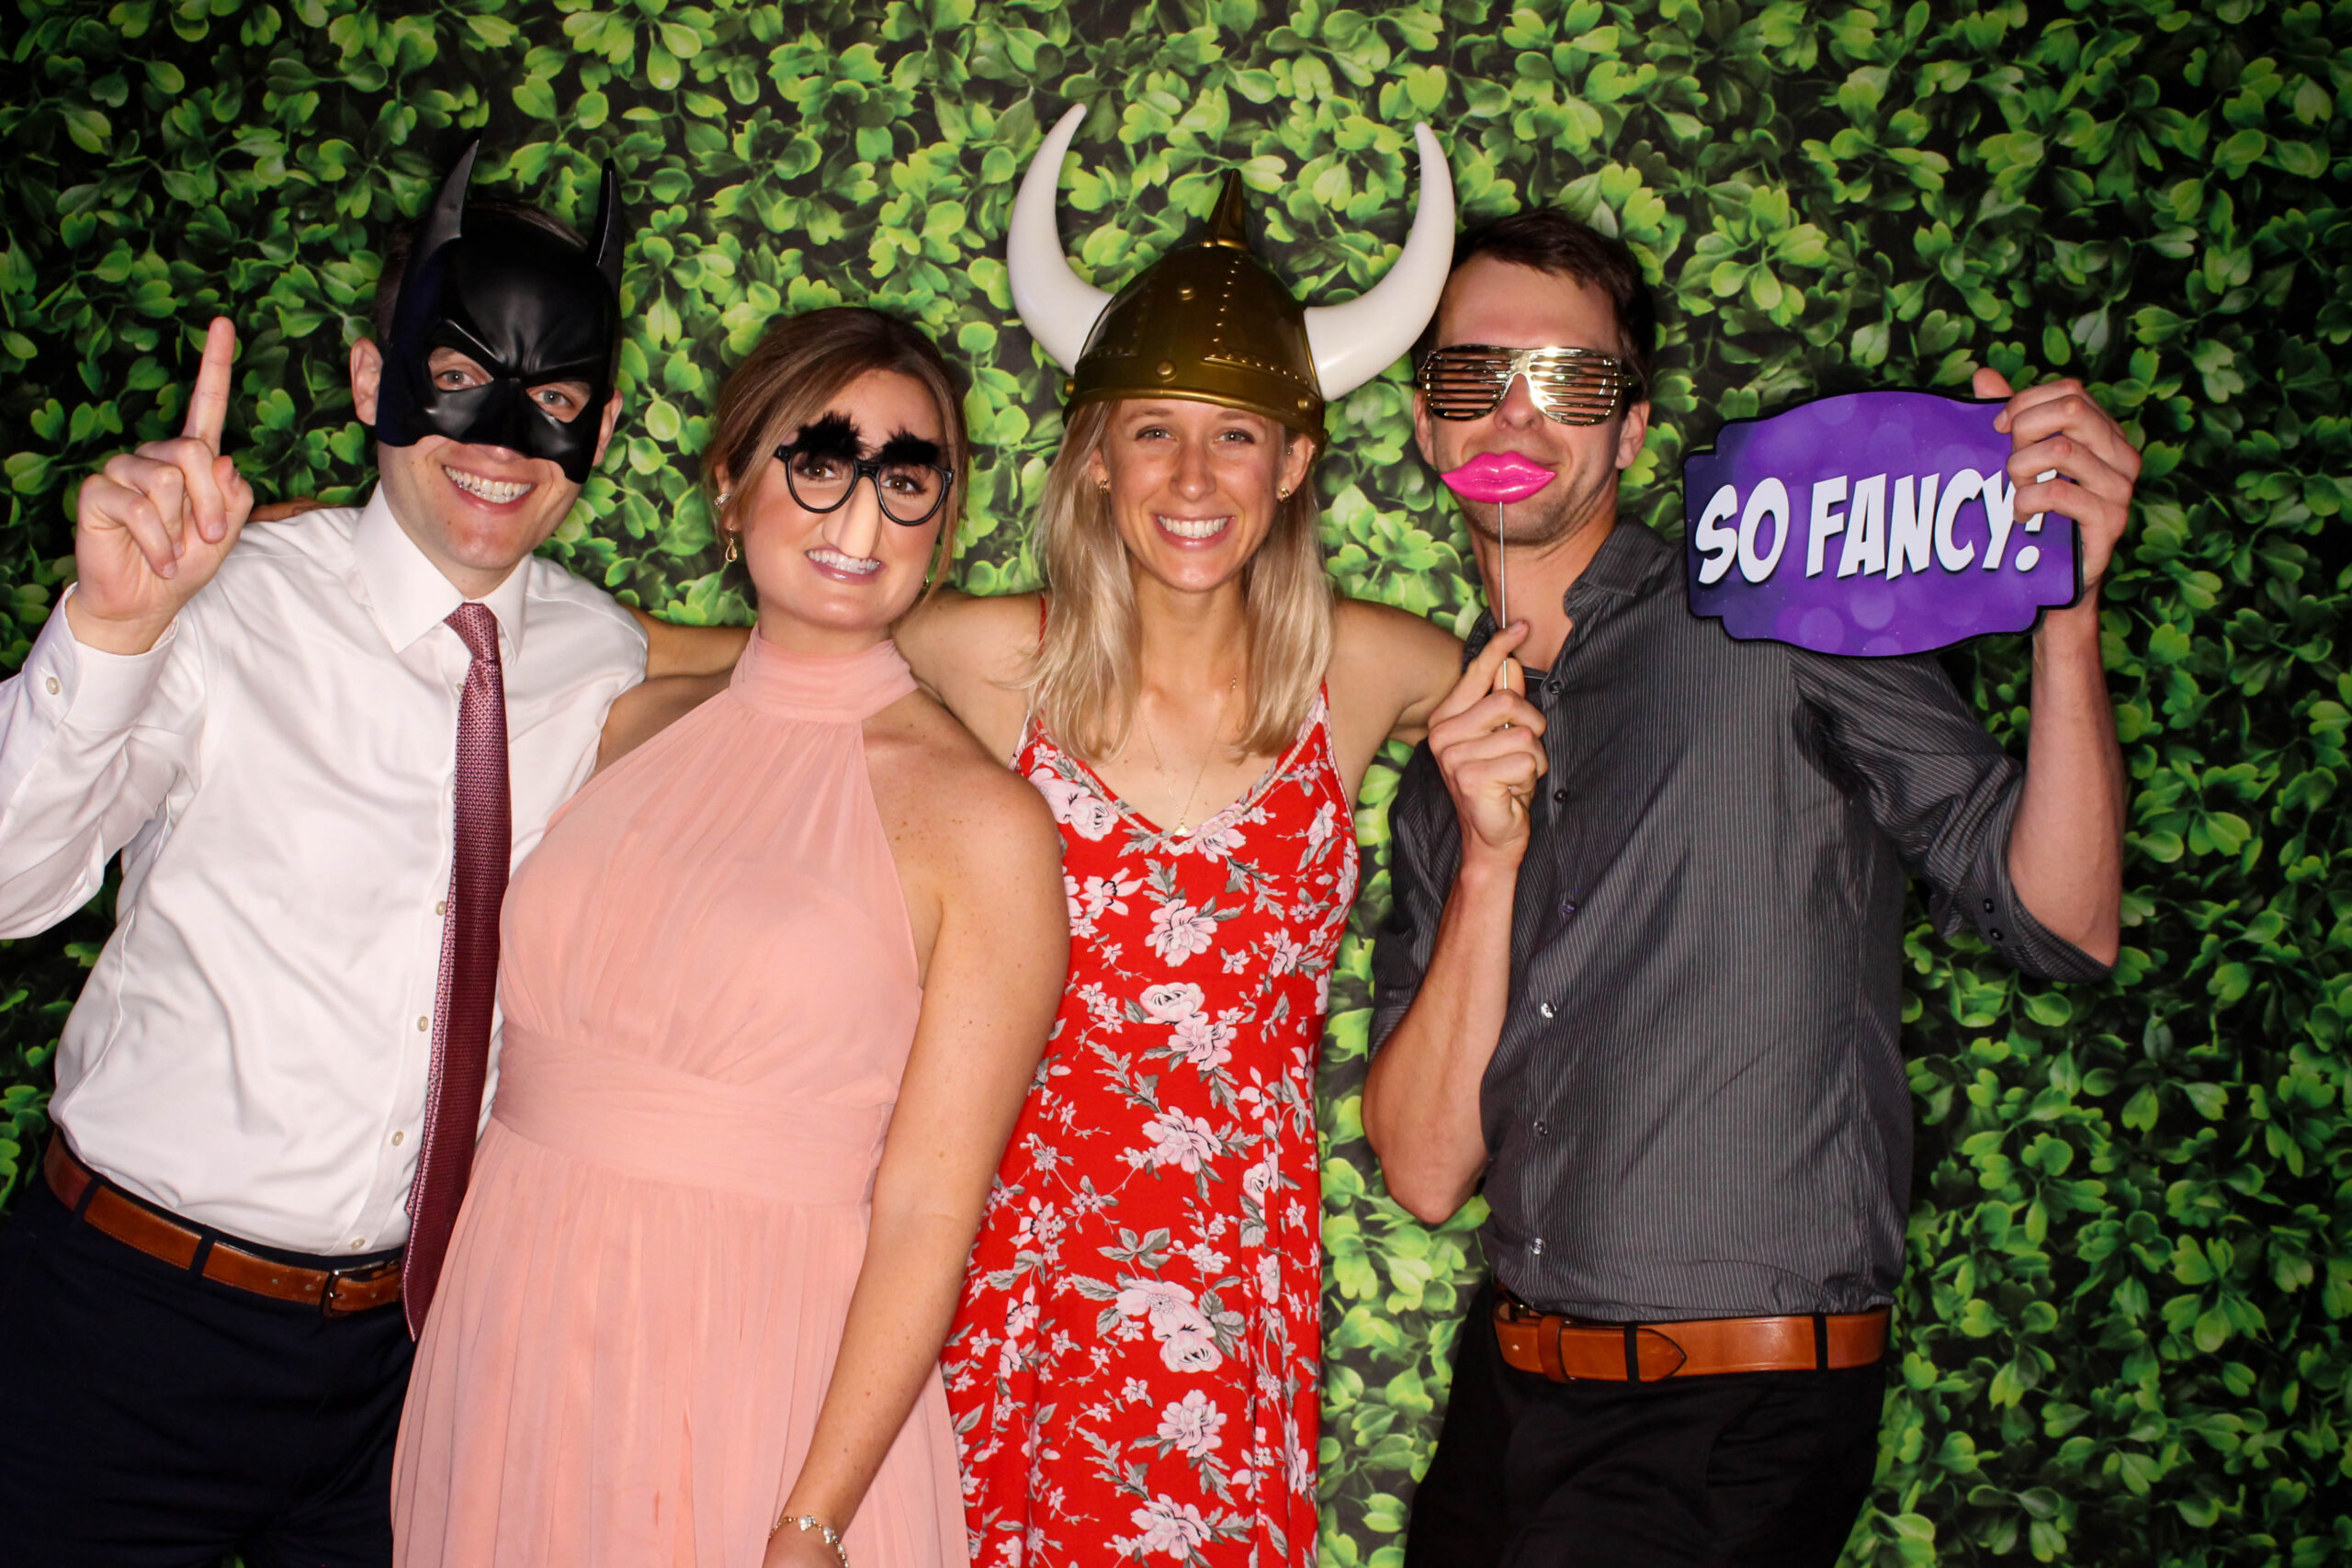 photo booth picture of four wedding guests in formal attire hugging on each other and wearing funny props against a green hedge background